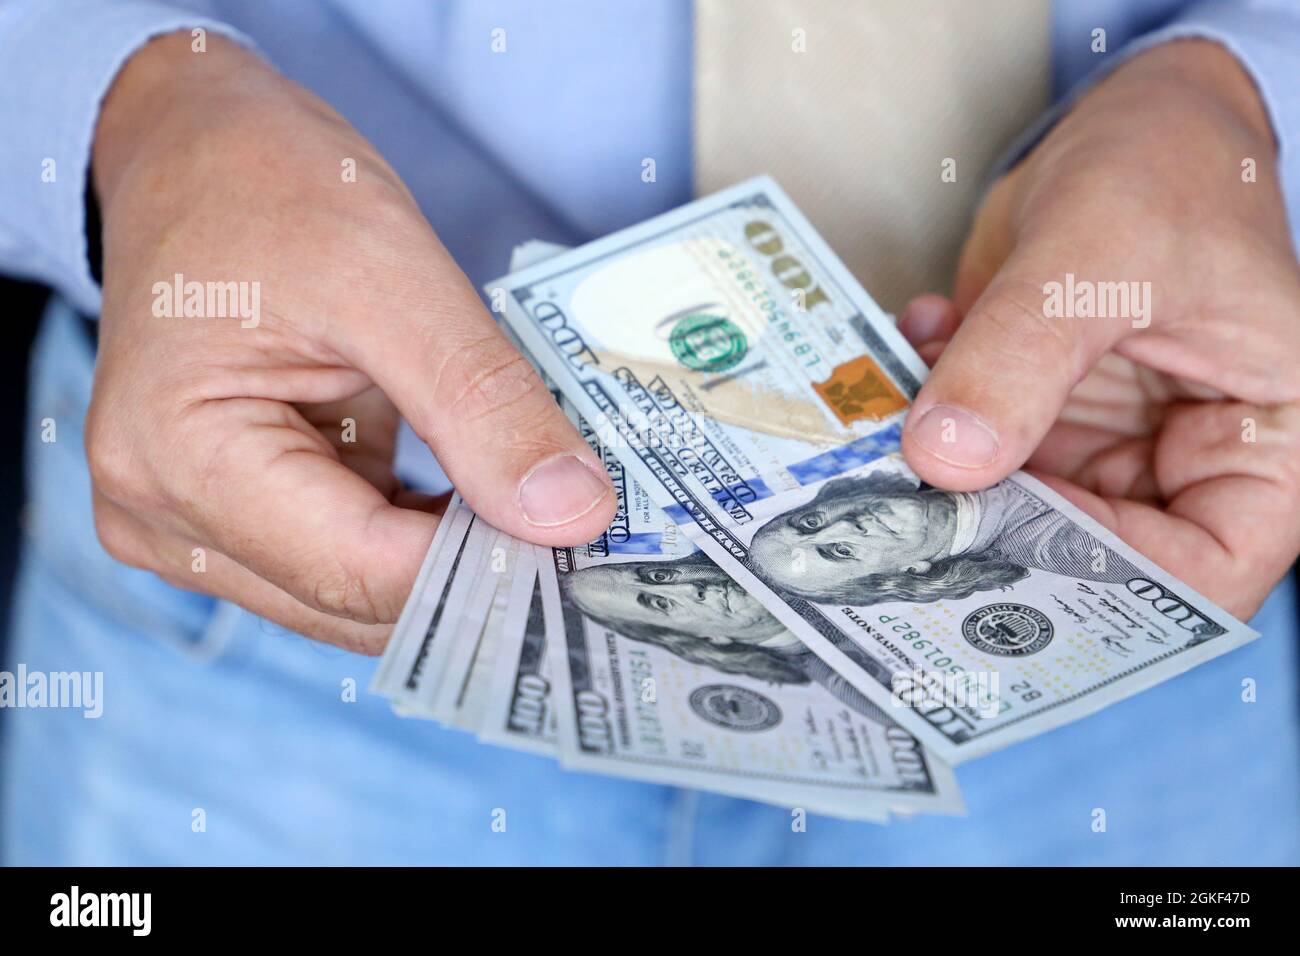 US dollars in male hand close up, man in business clothes counting the money. Concept of bribe, salary, financial assistance or loan Stock Photo